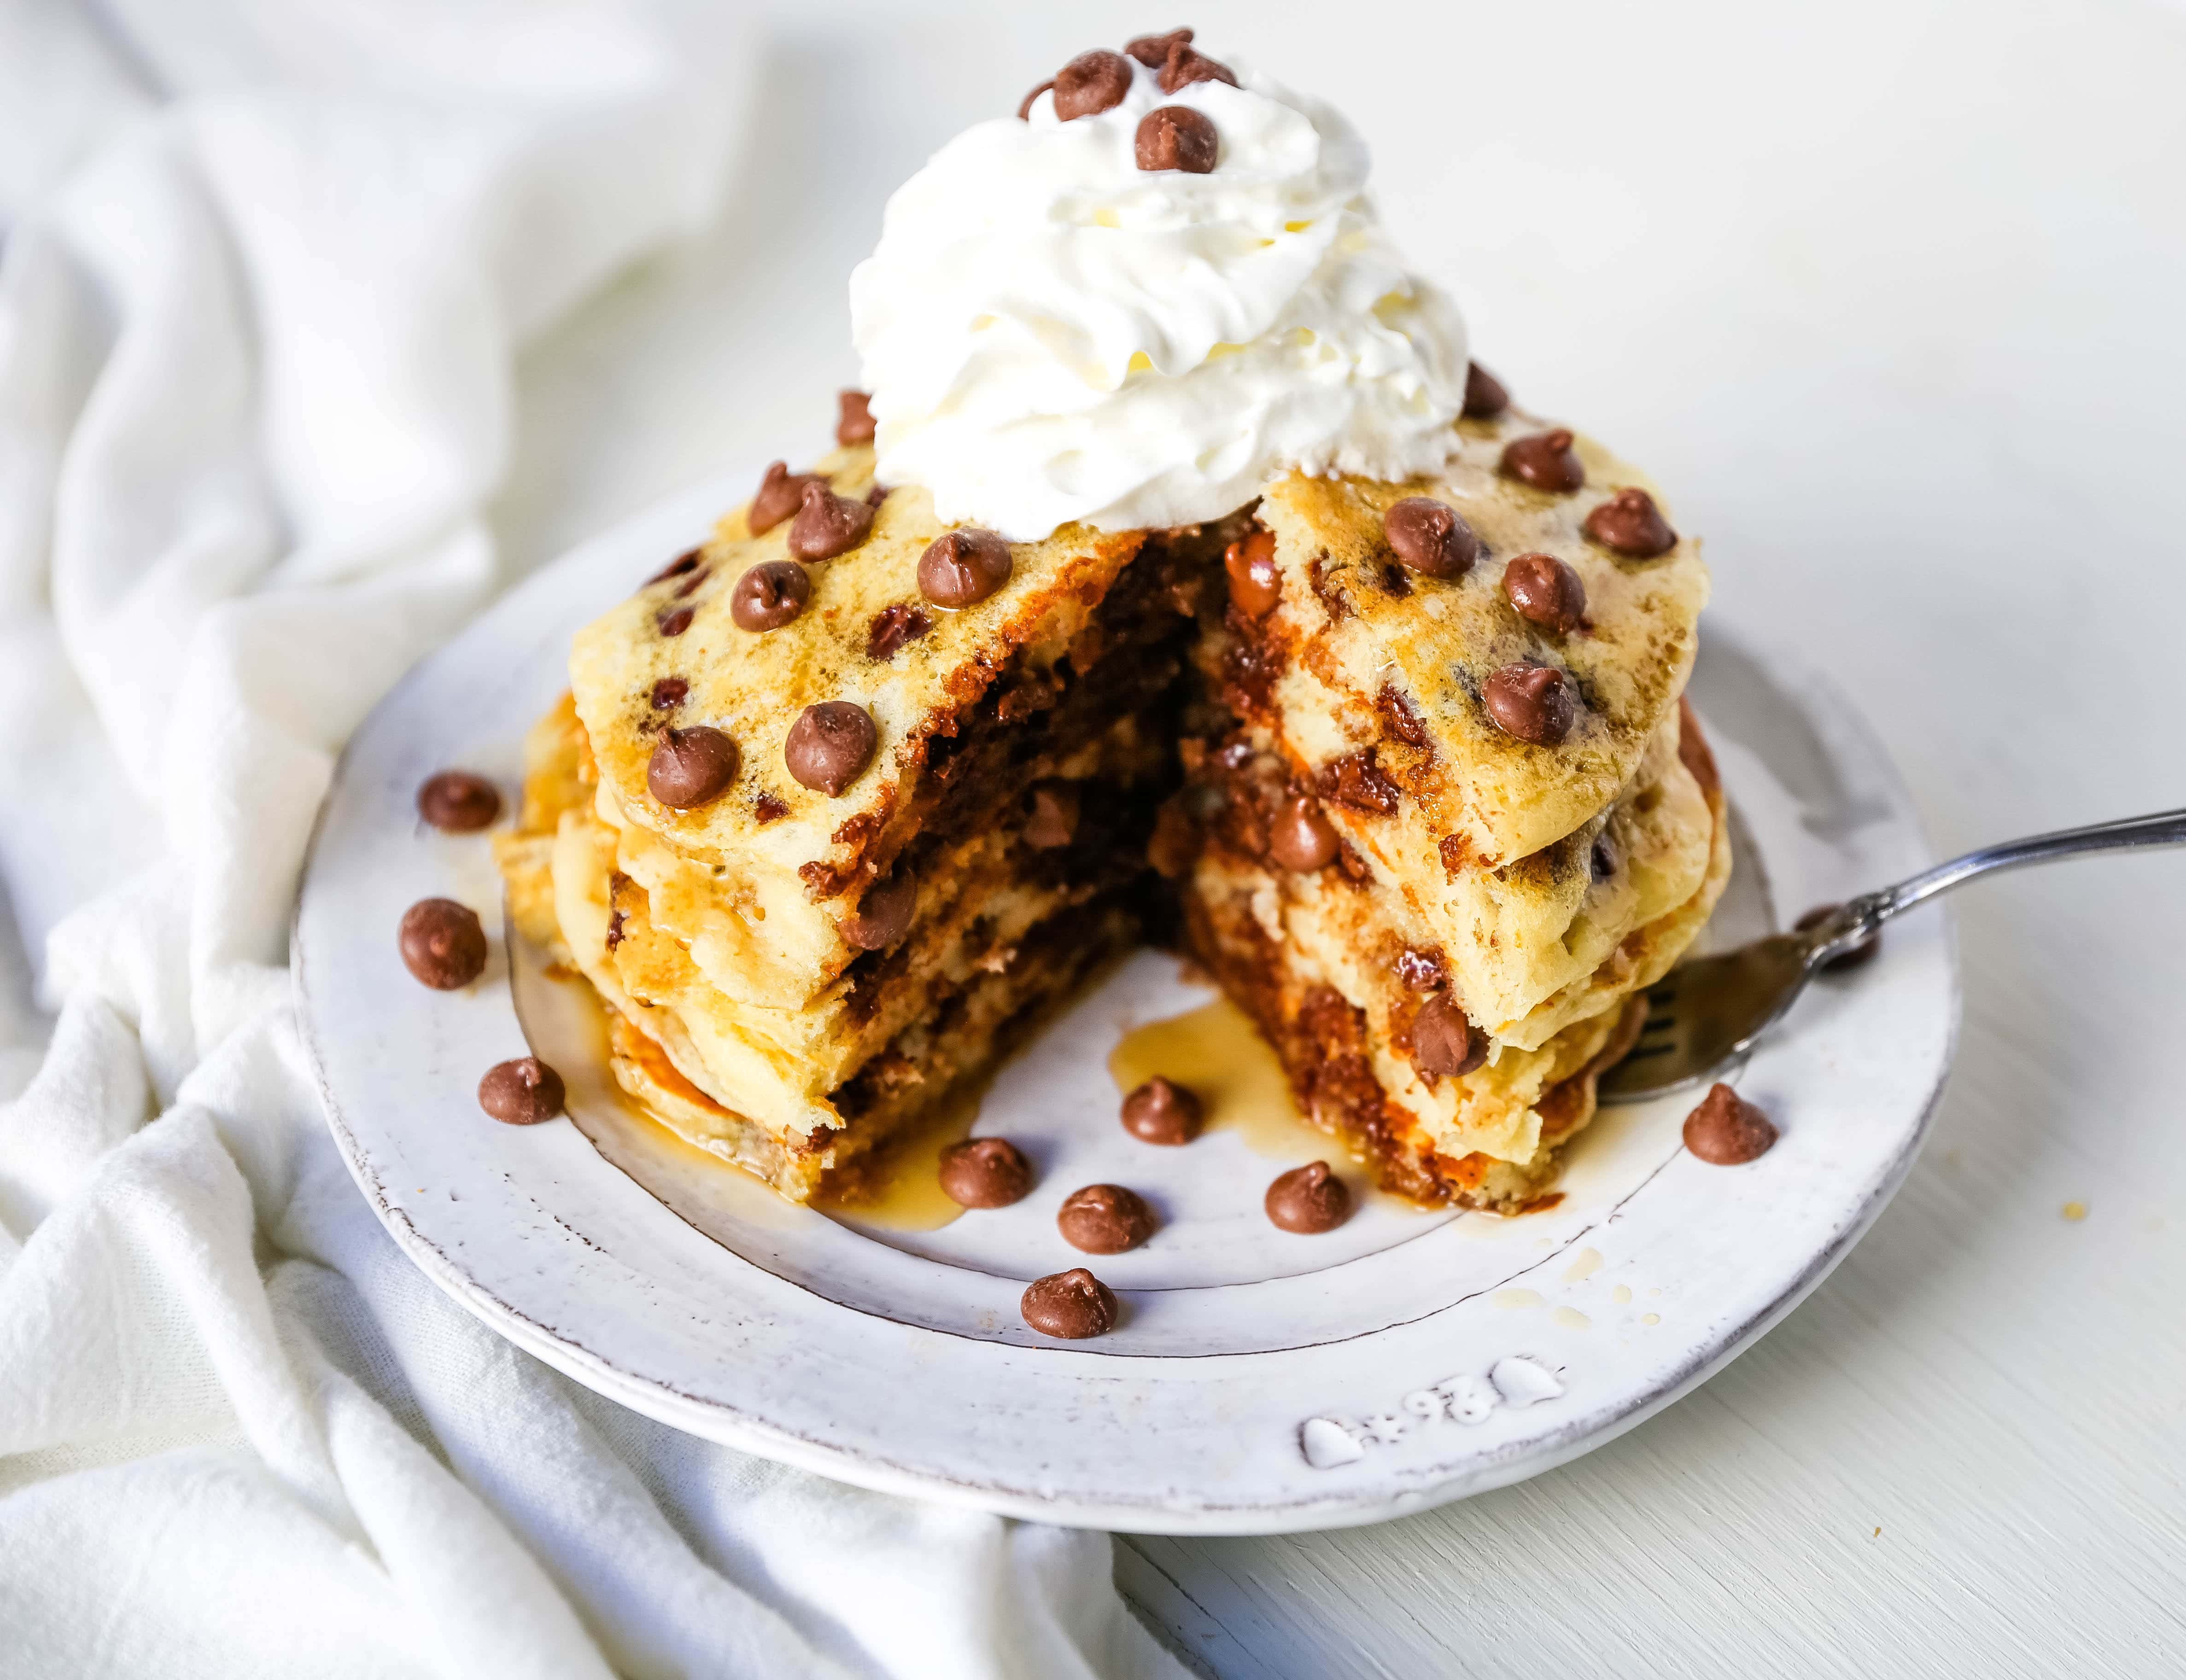 Chocolate Chip Pancakes The Best Homemade light, fluffy buttermilk pancakes with sweet milk chocolate chips. It makes the most decadent breakfast! www.modernhoney.com #pancakes #chocolatechippancakes #chocolatepancakes